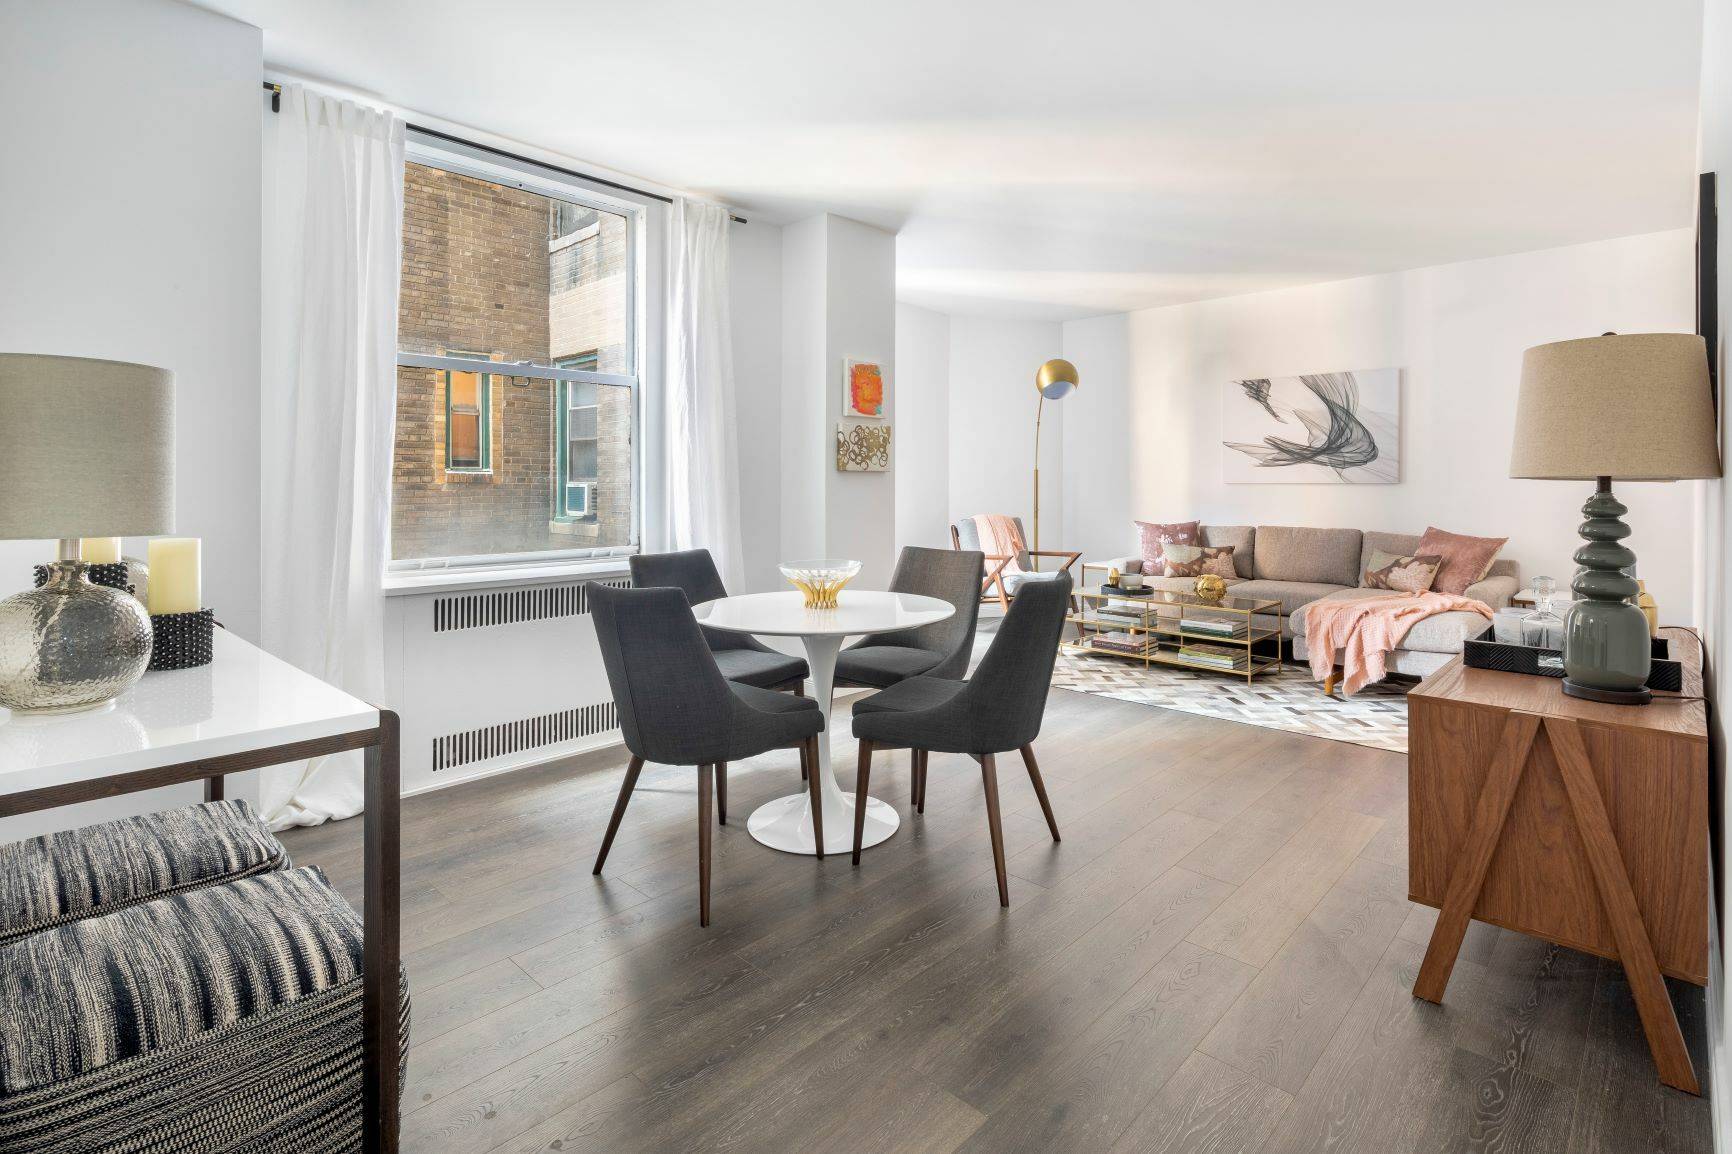 Spread out in this spacious, beautifully renovated one bedroom apartment in the heart of the Upper West Side.